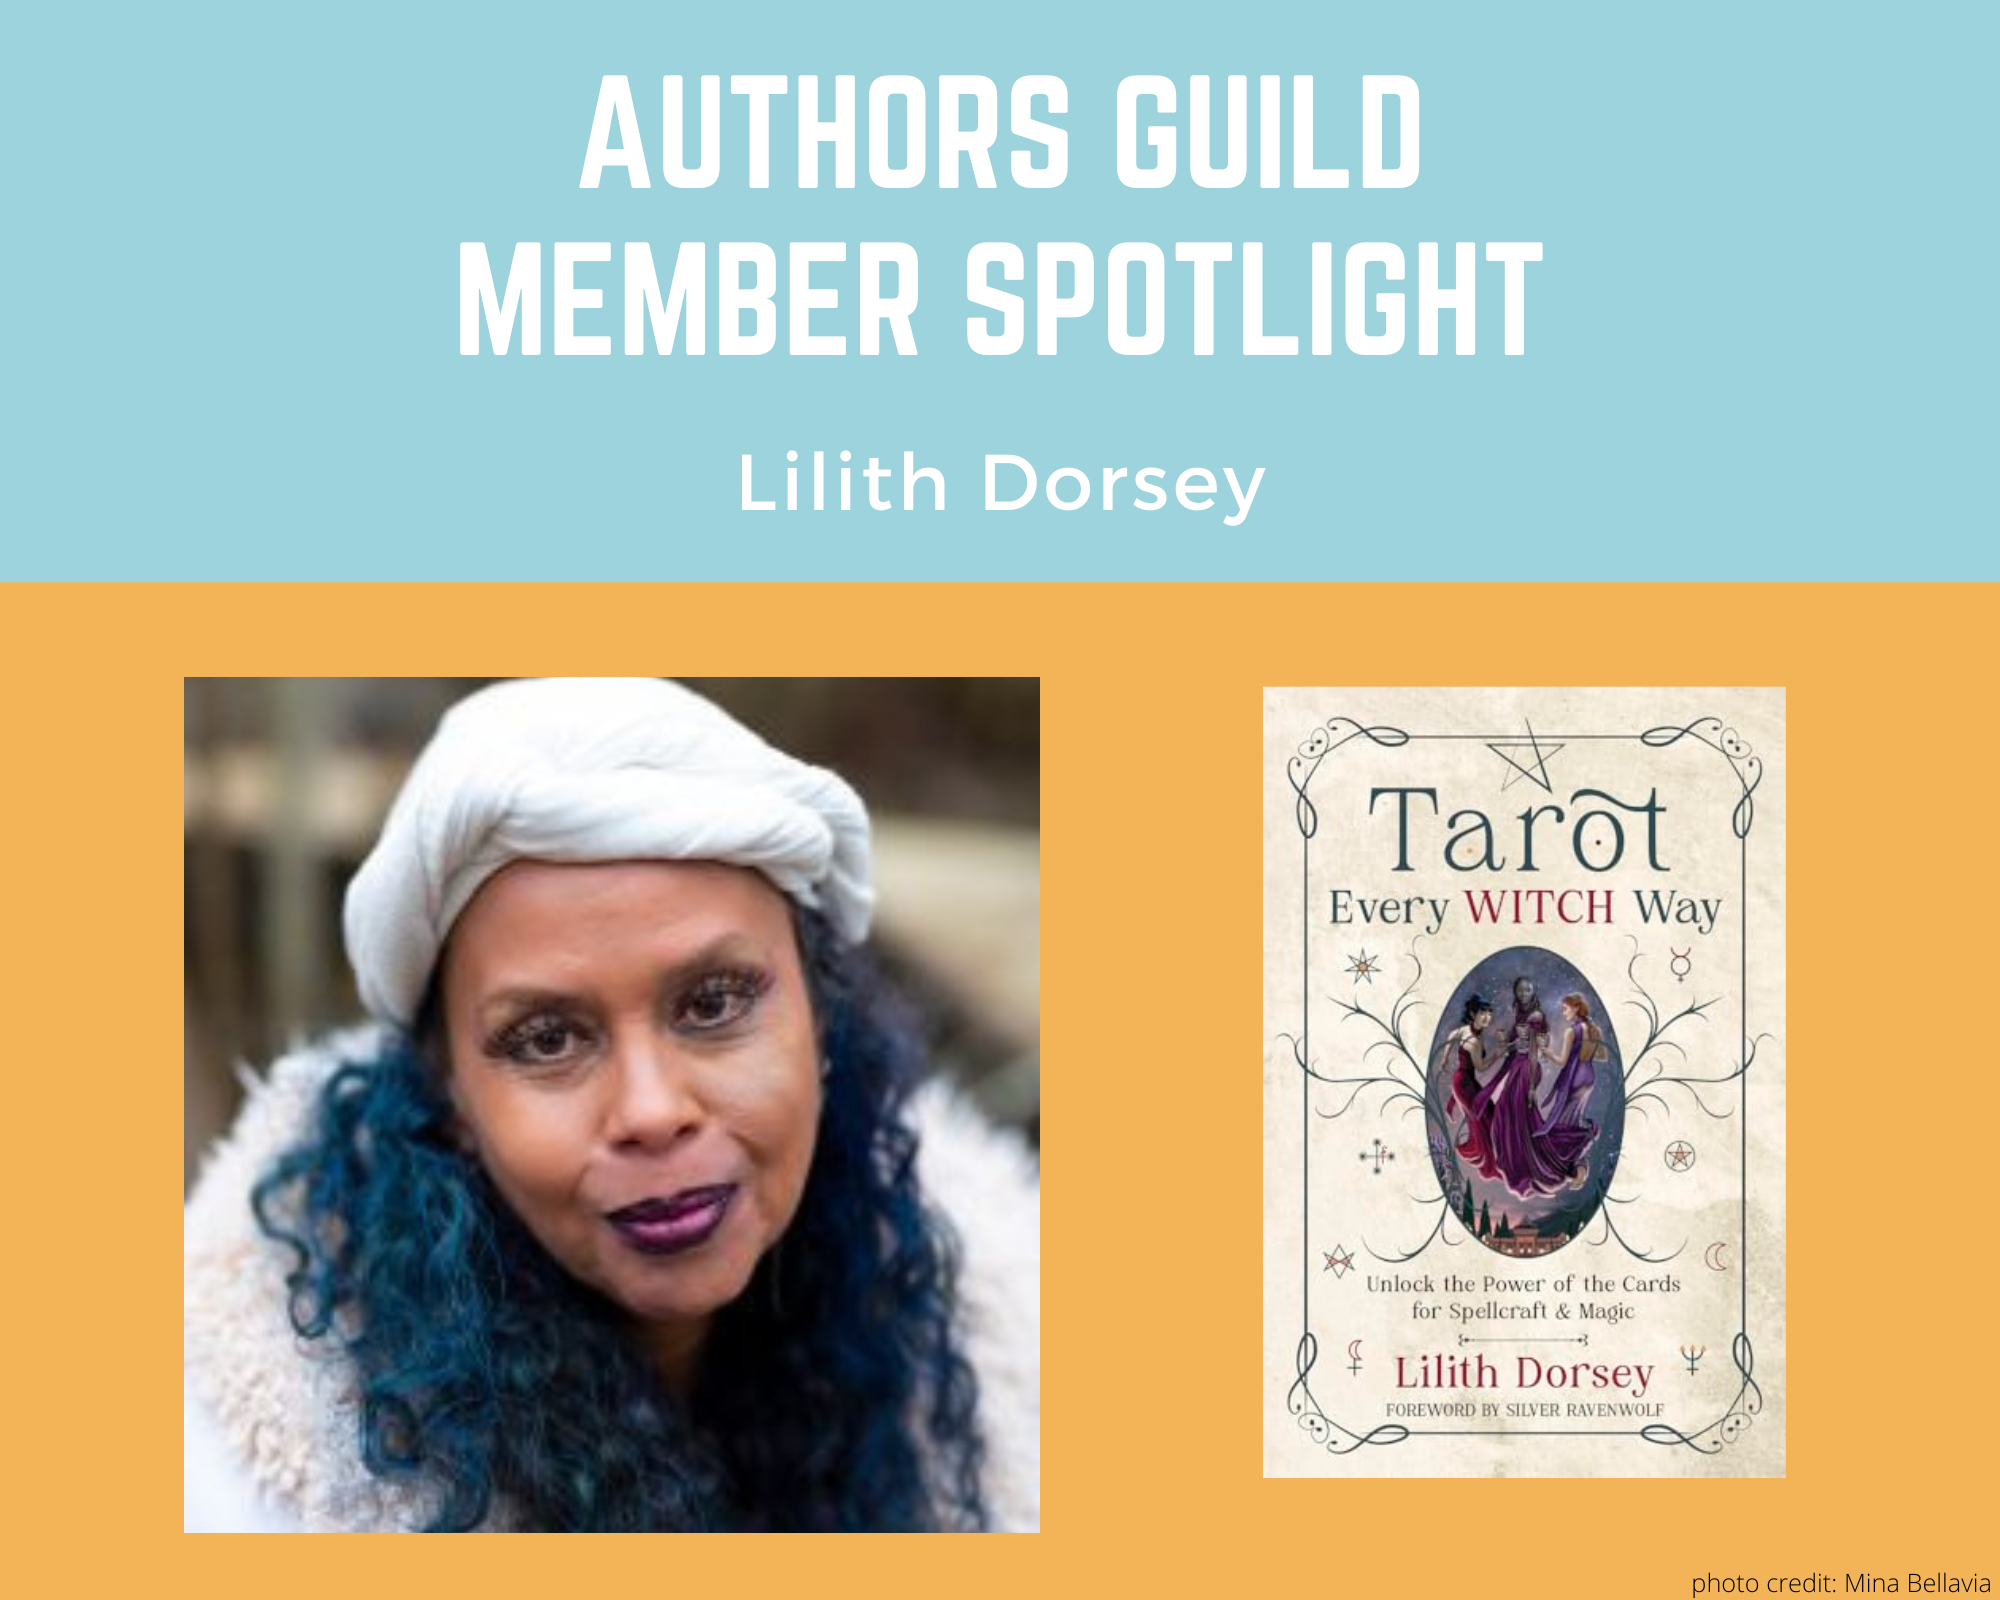 author Lilith Dorsey and her book Tarot Every Witch Way